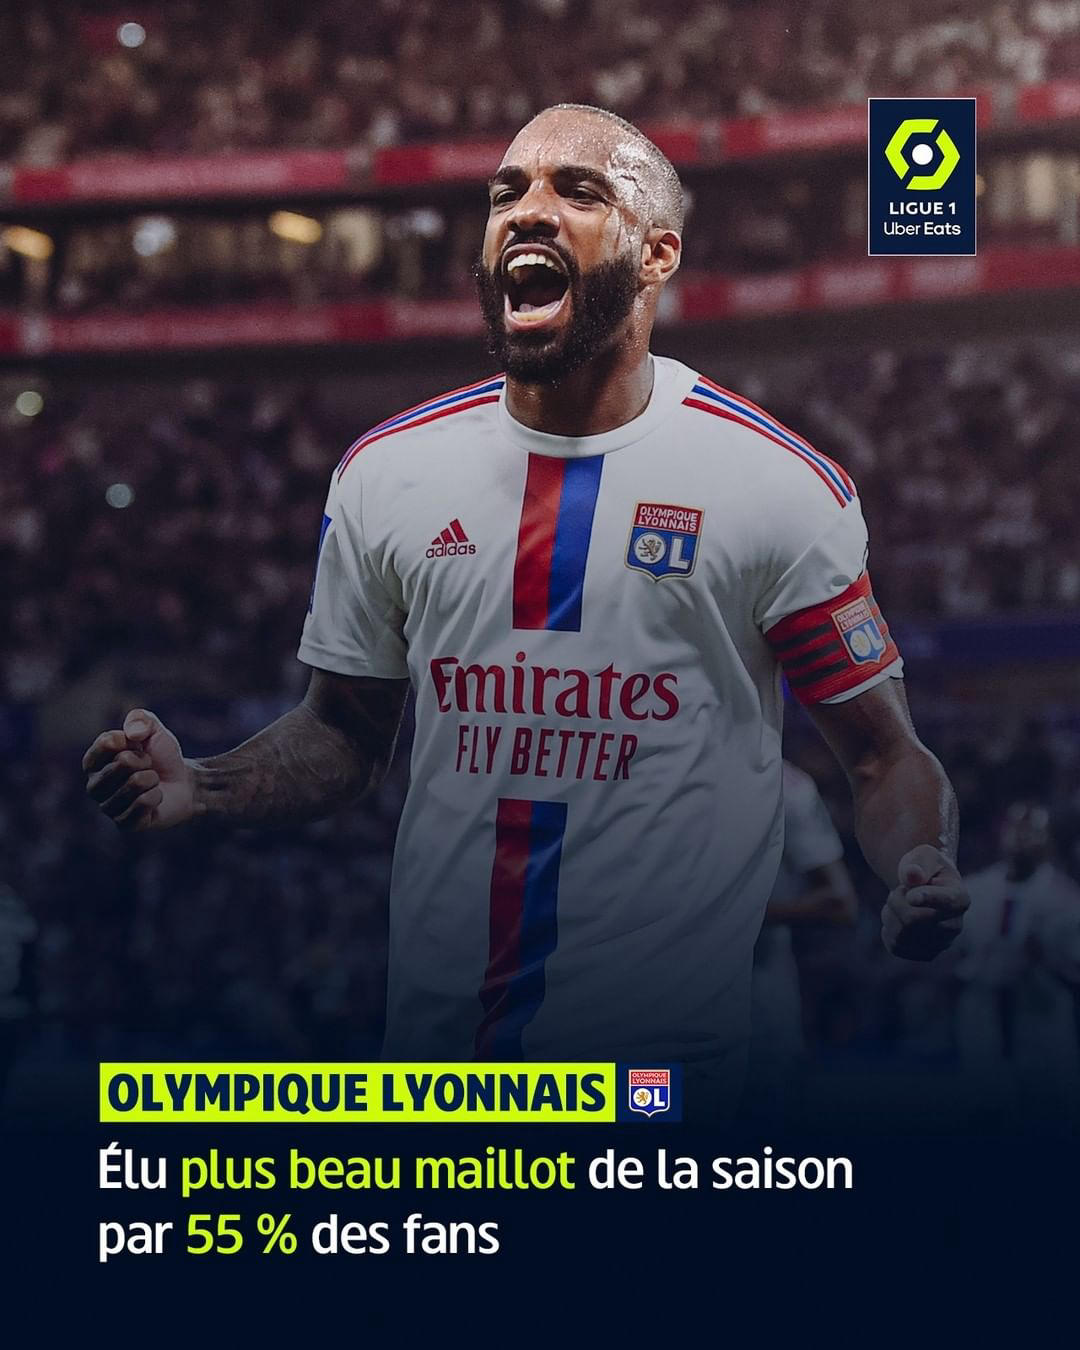 image  1 Ligue 1 Uber Eats - Post of the day : 25/8/2022